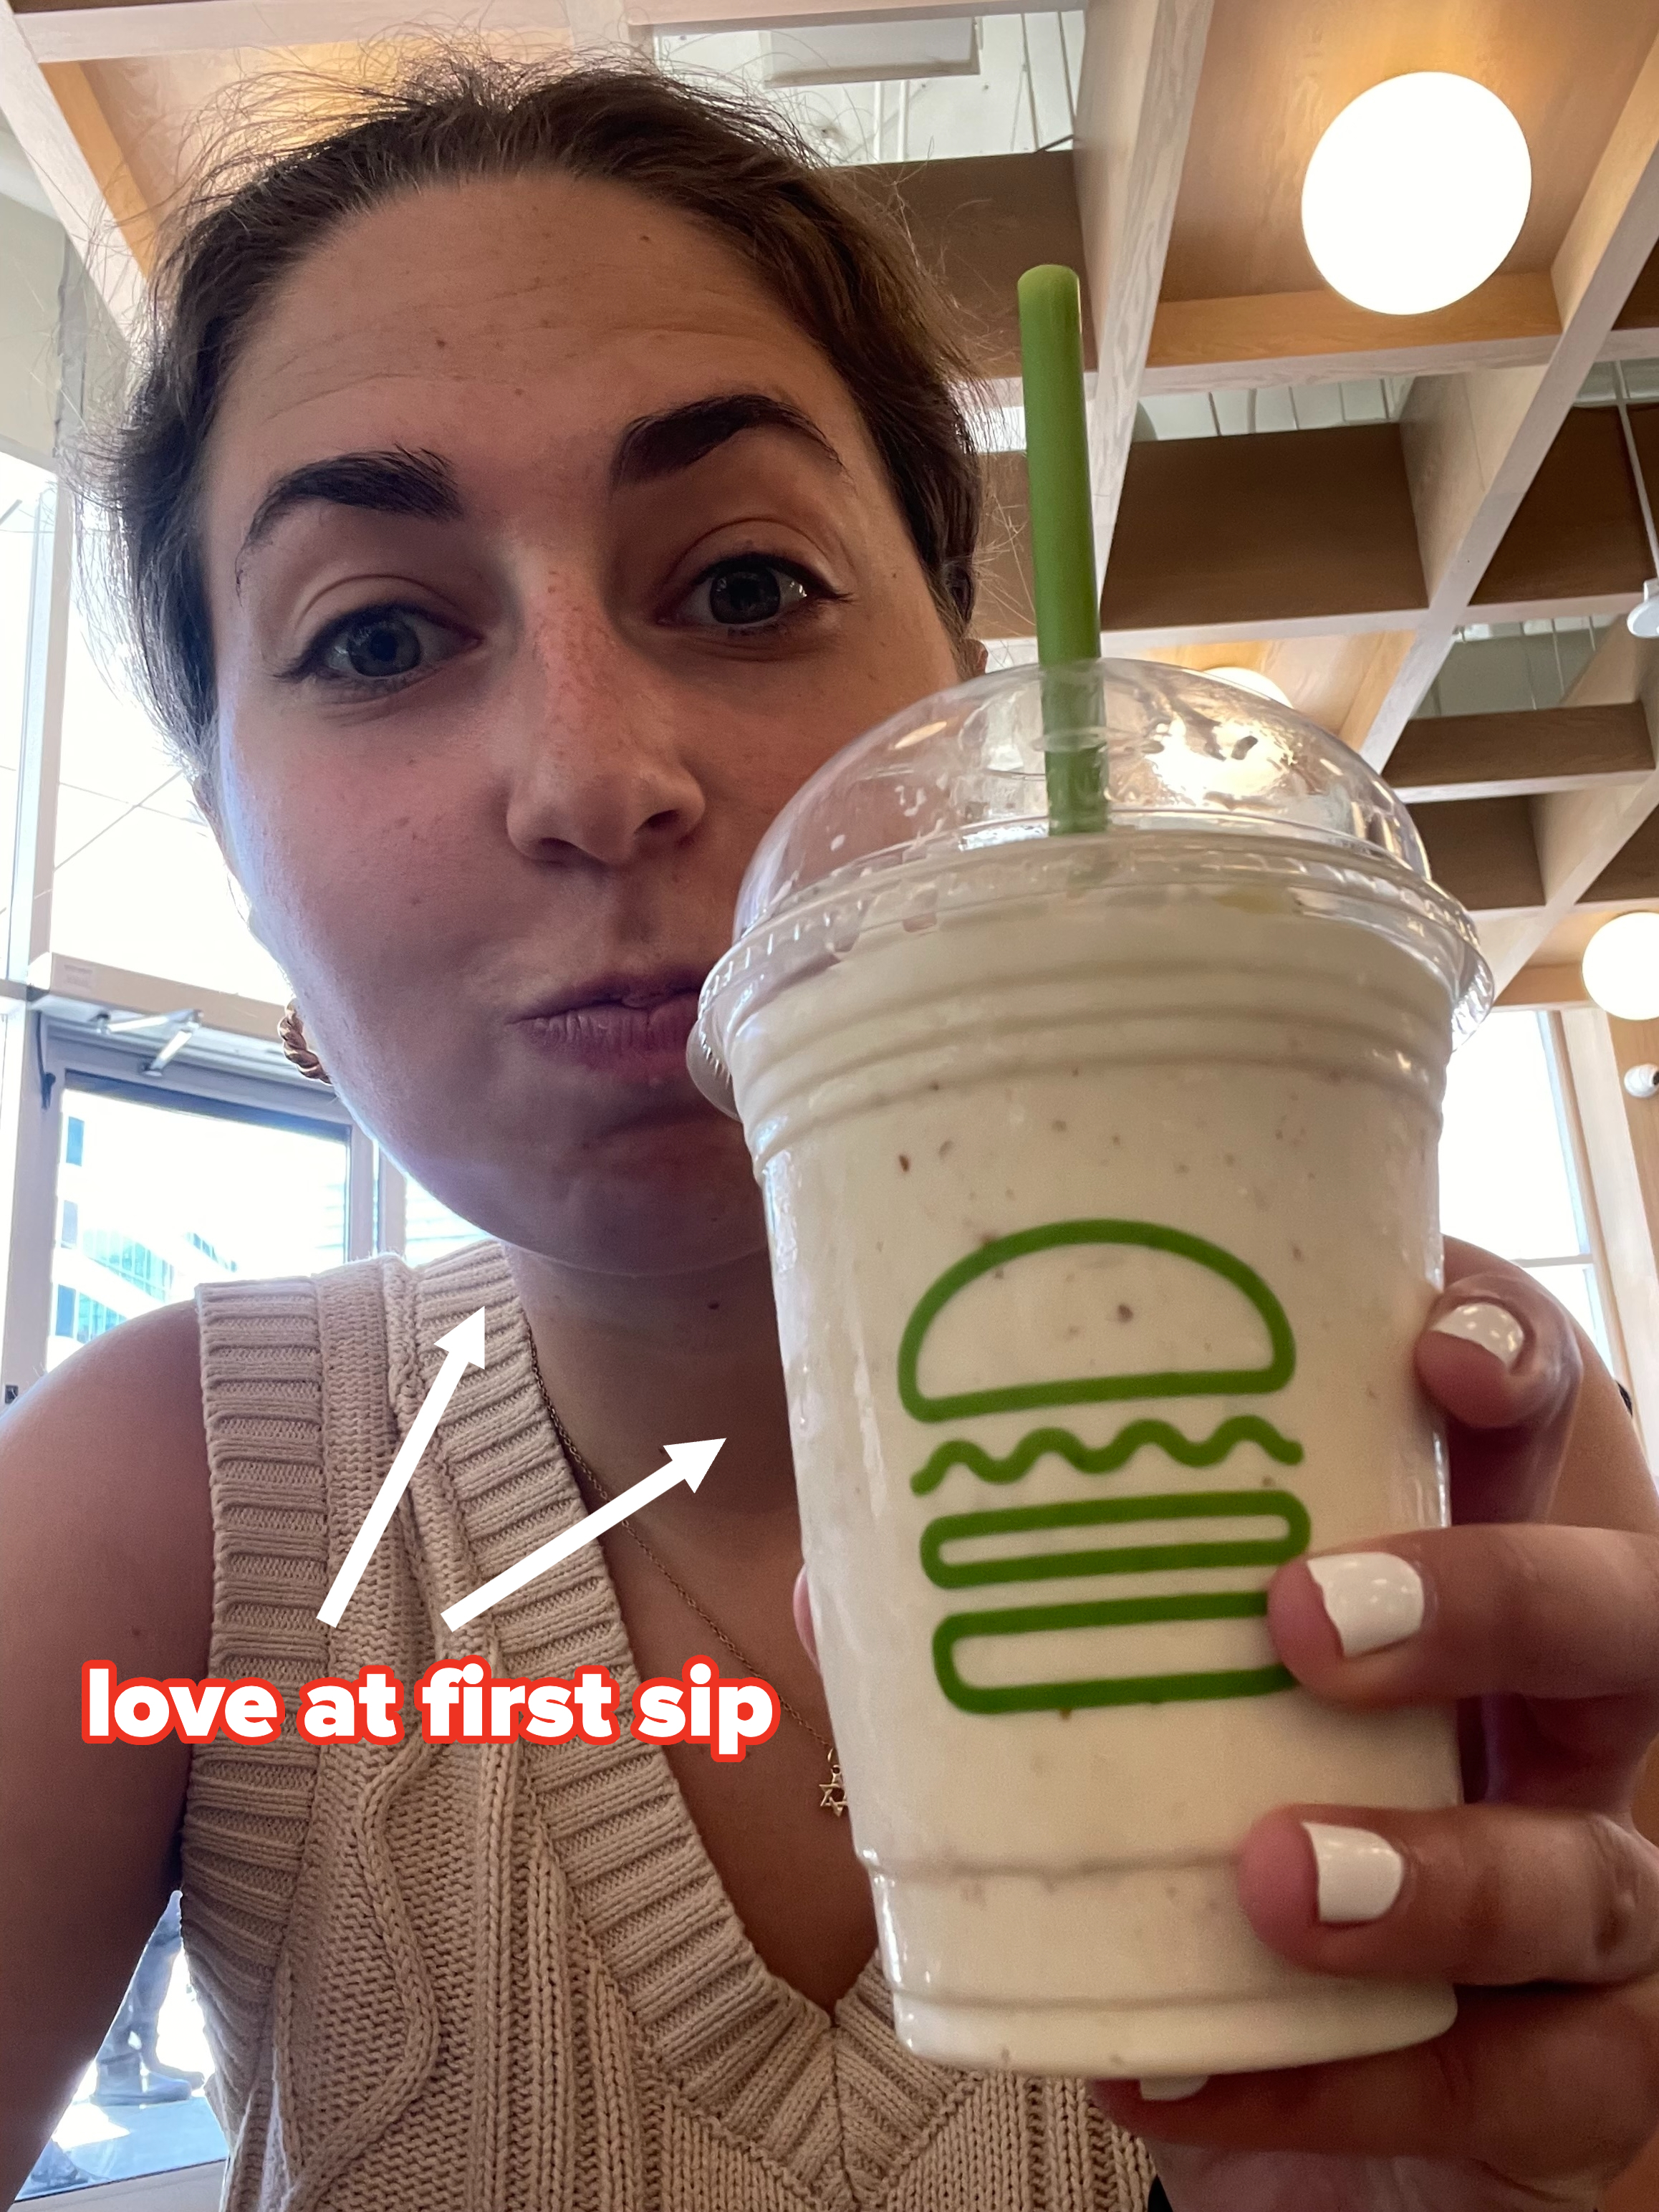 Person holding a milkshake with a green straw in a cup featuring the Shake Shack logo, smiling into the camera indoors